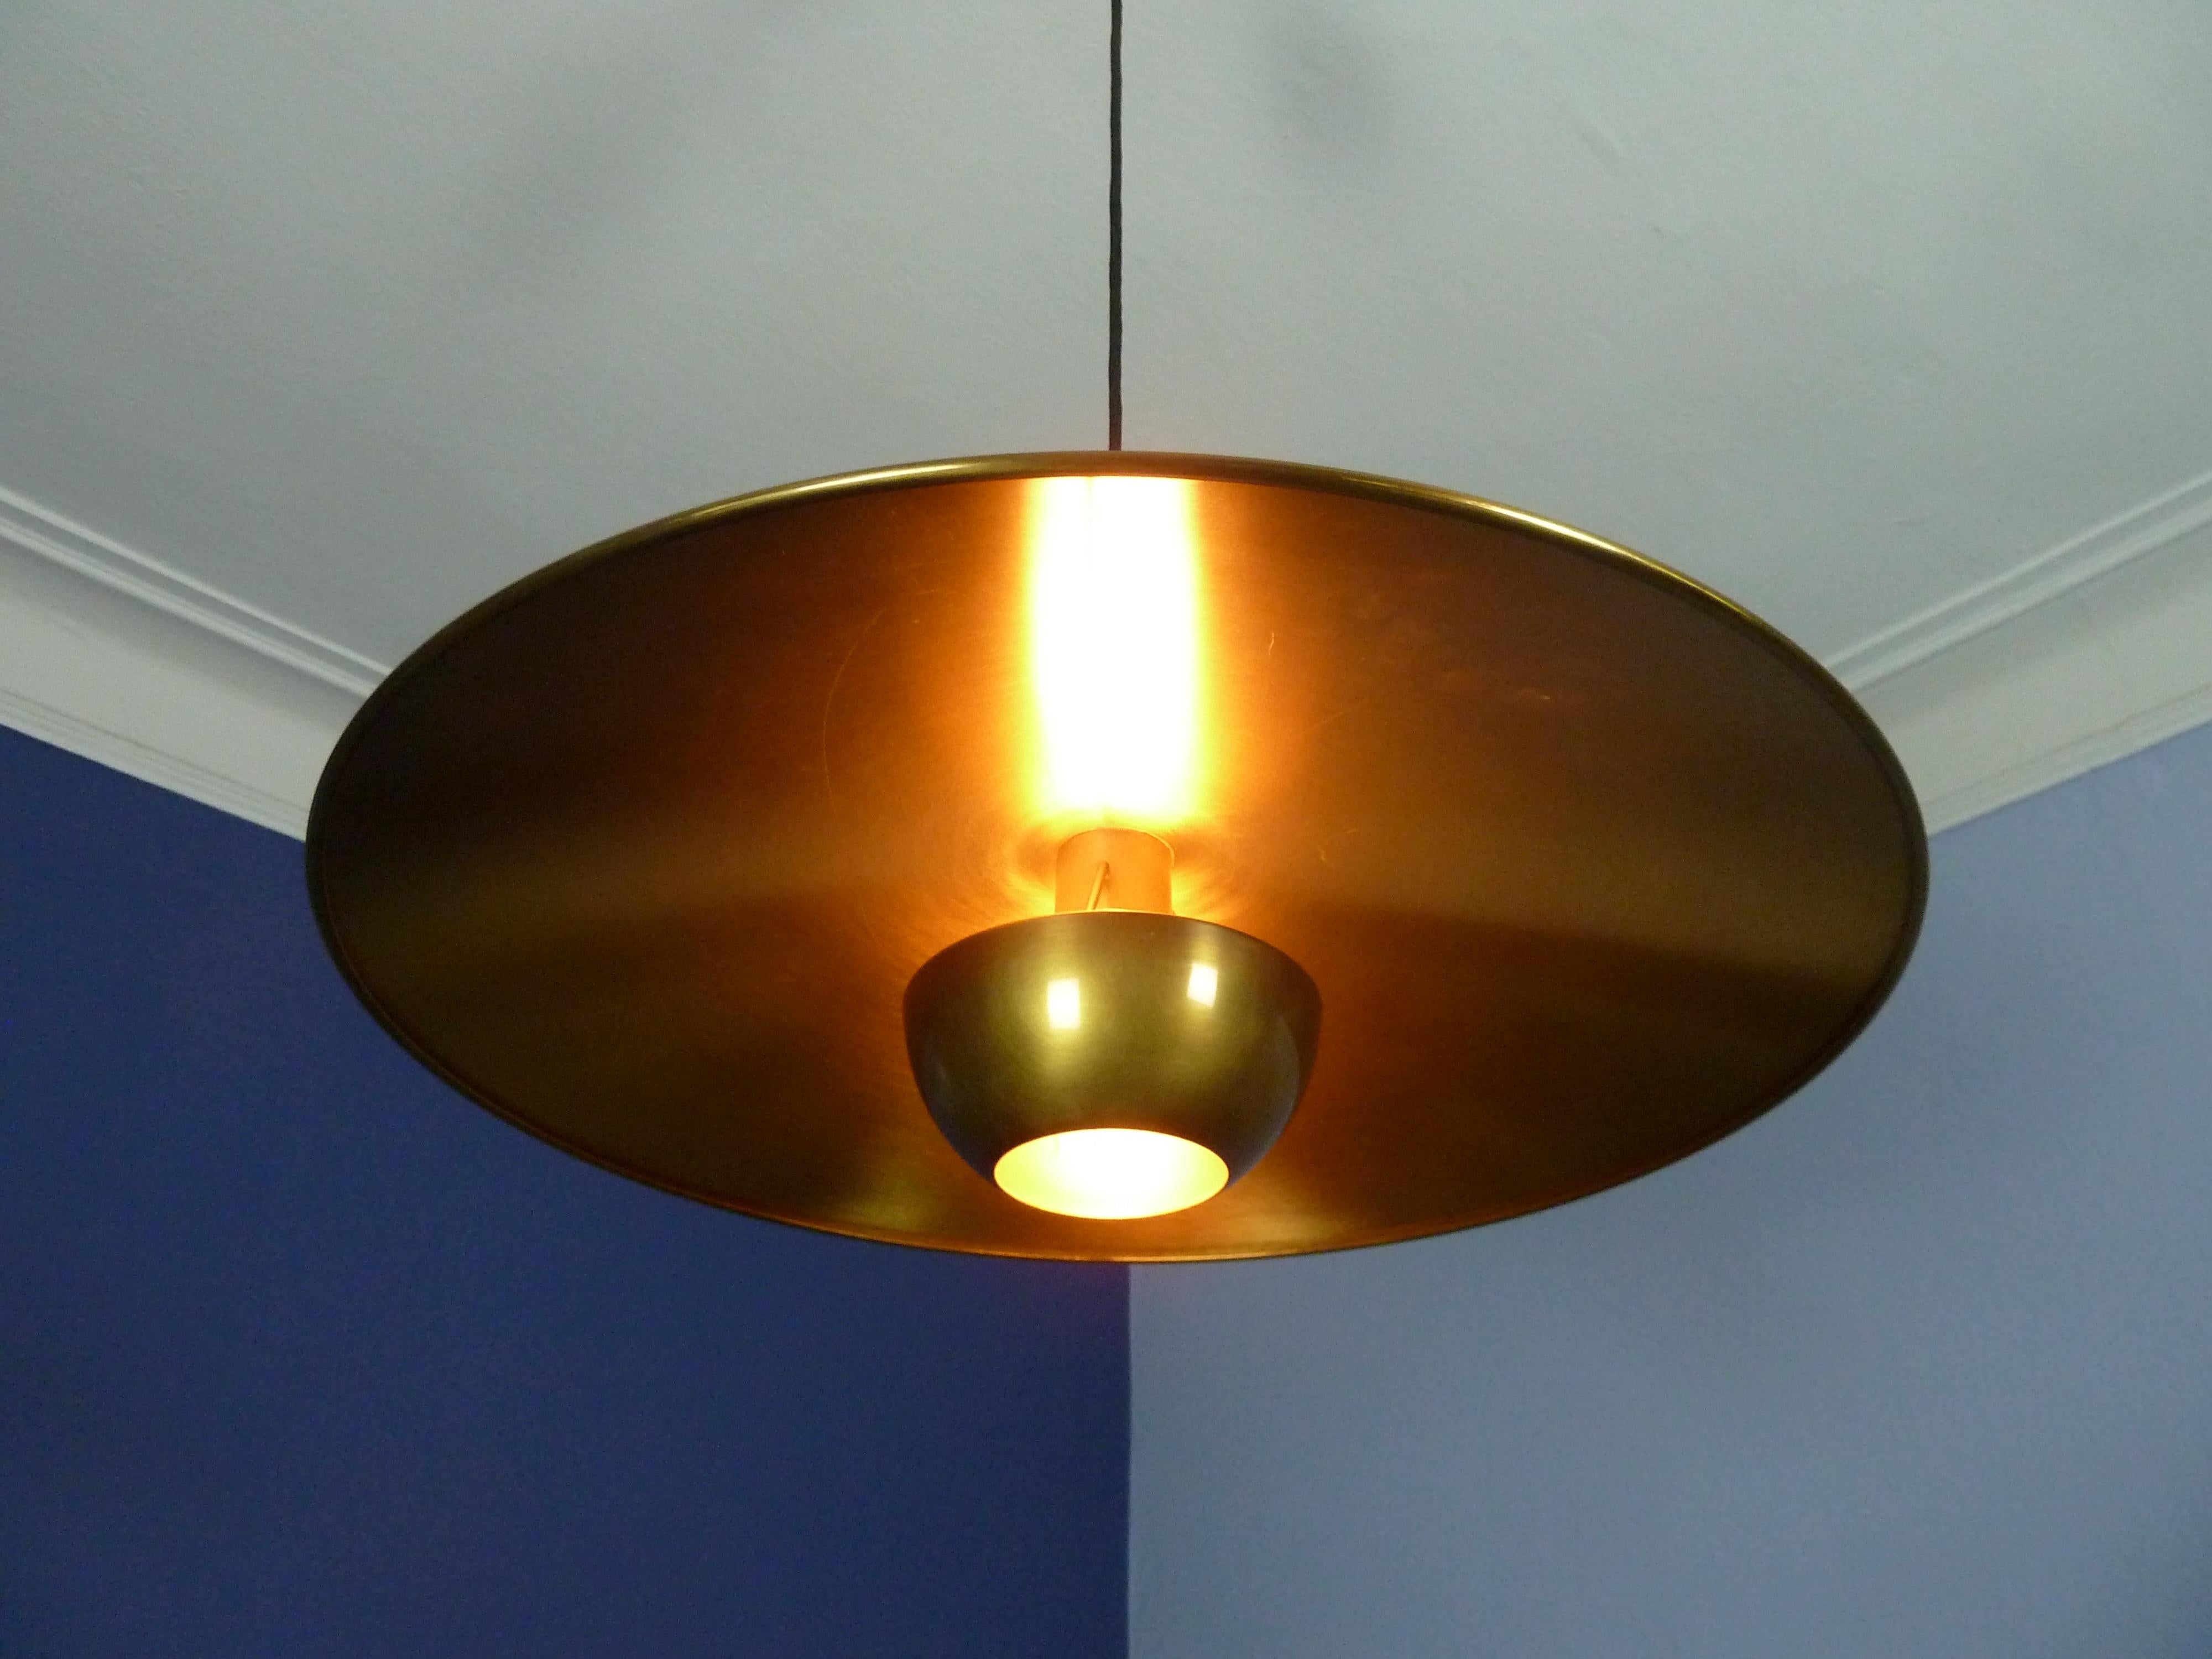 Adjustable Brass Pendant Onos55 by Florian Schulz with a Central Counterweight 5